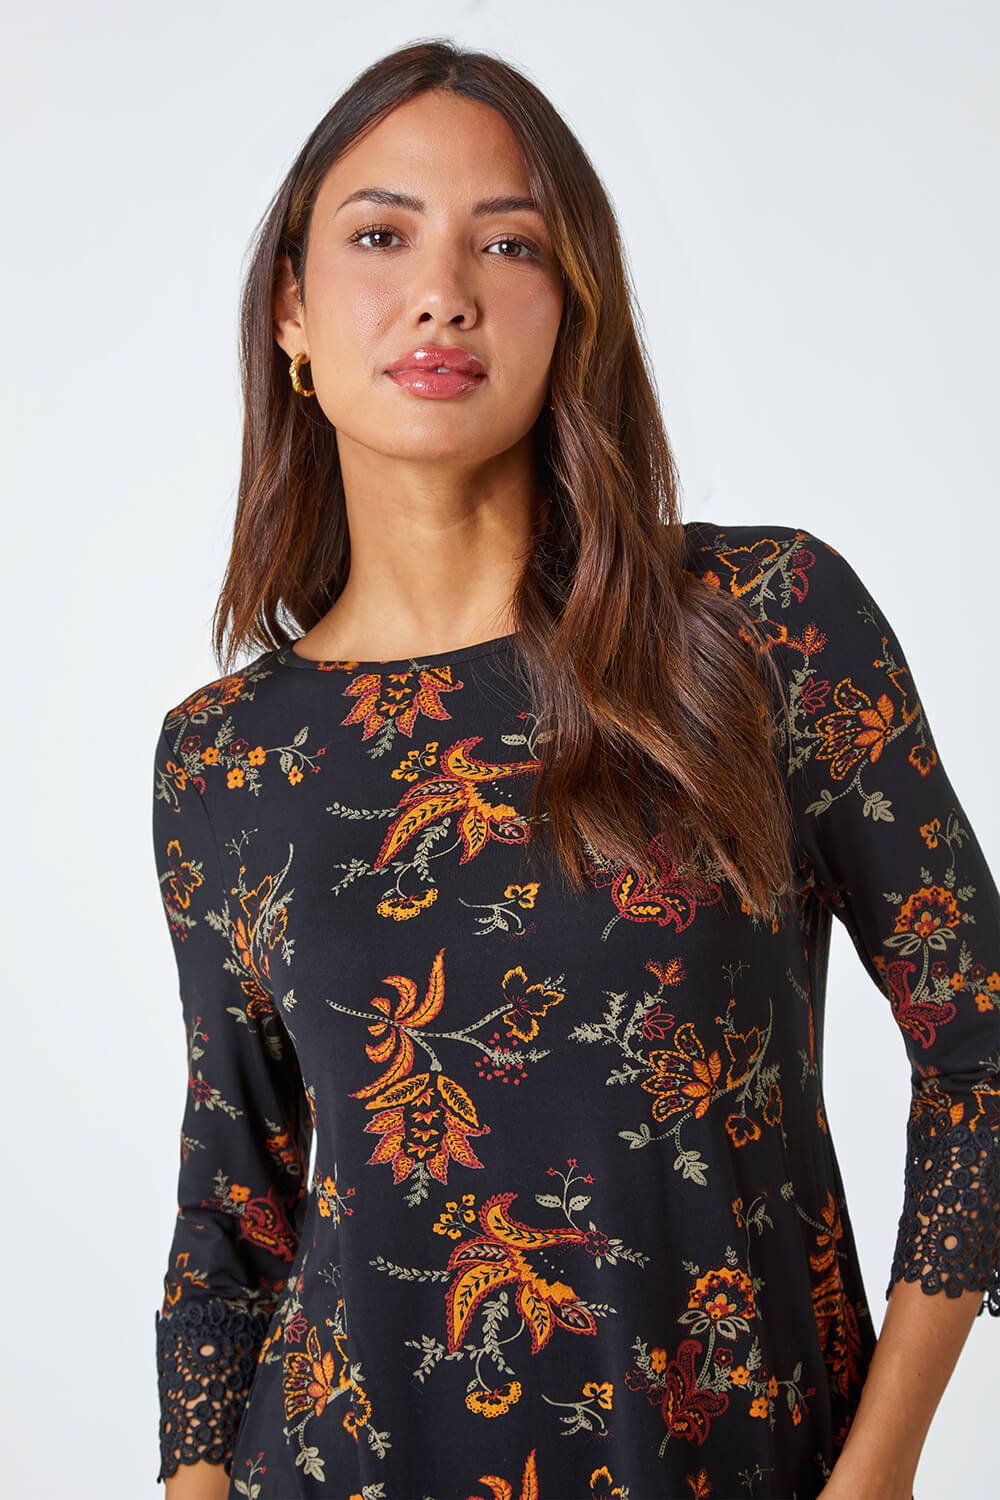 Ochre Paisley Print Lace Trim Stretch Top, Image 4 of 5